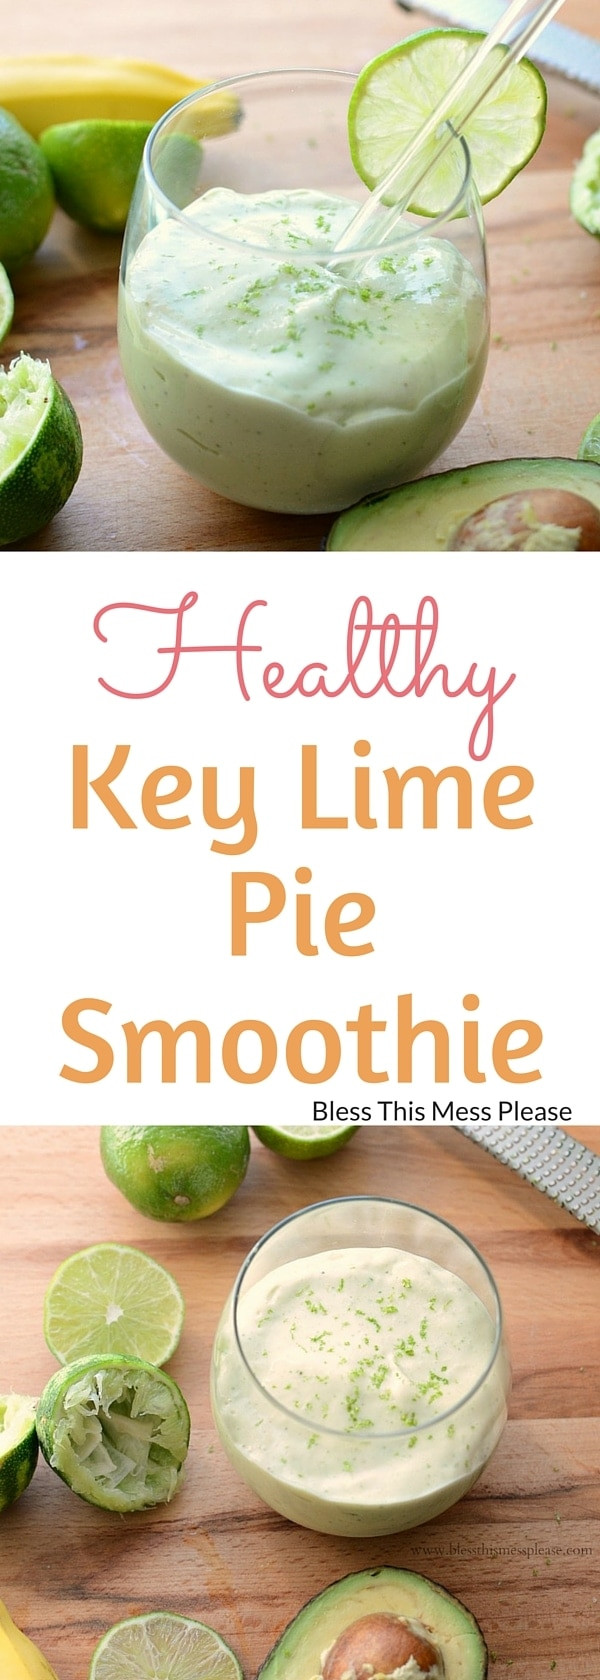 Healthy Key Lime Pie
 Healthy Key Lime Pie Smoothie Bless This Mess